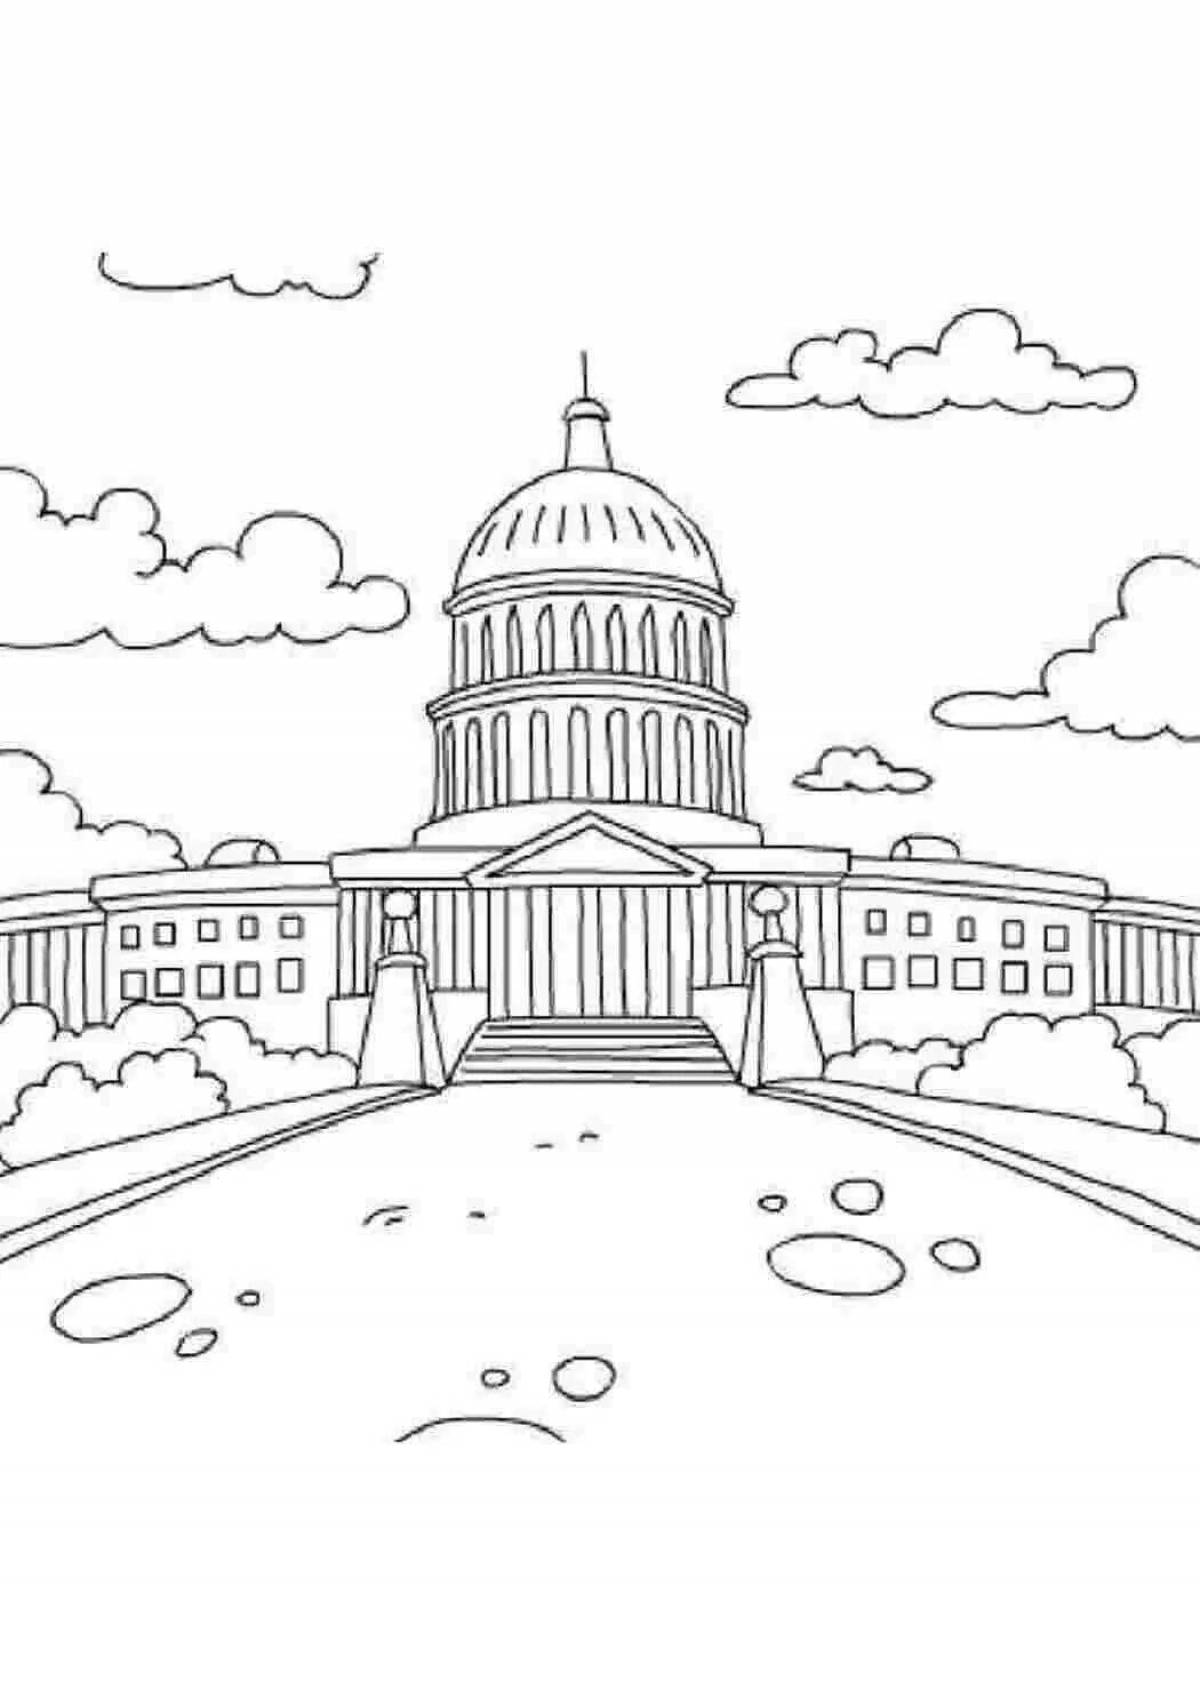 Coloring book luxury white house